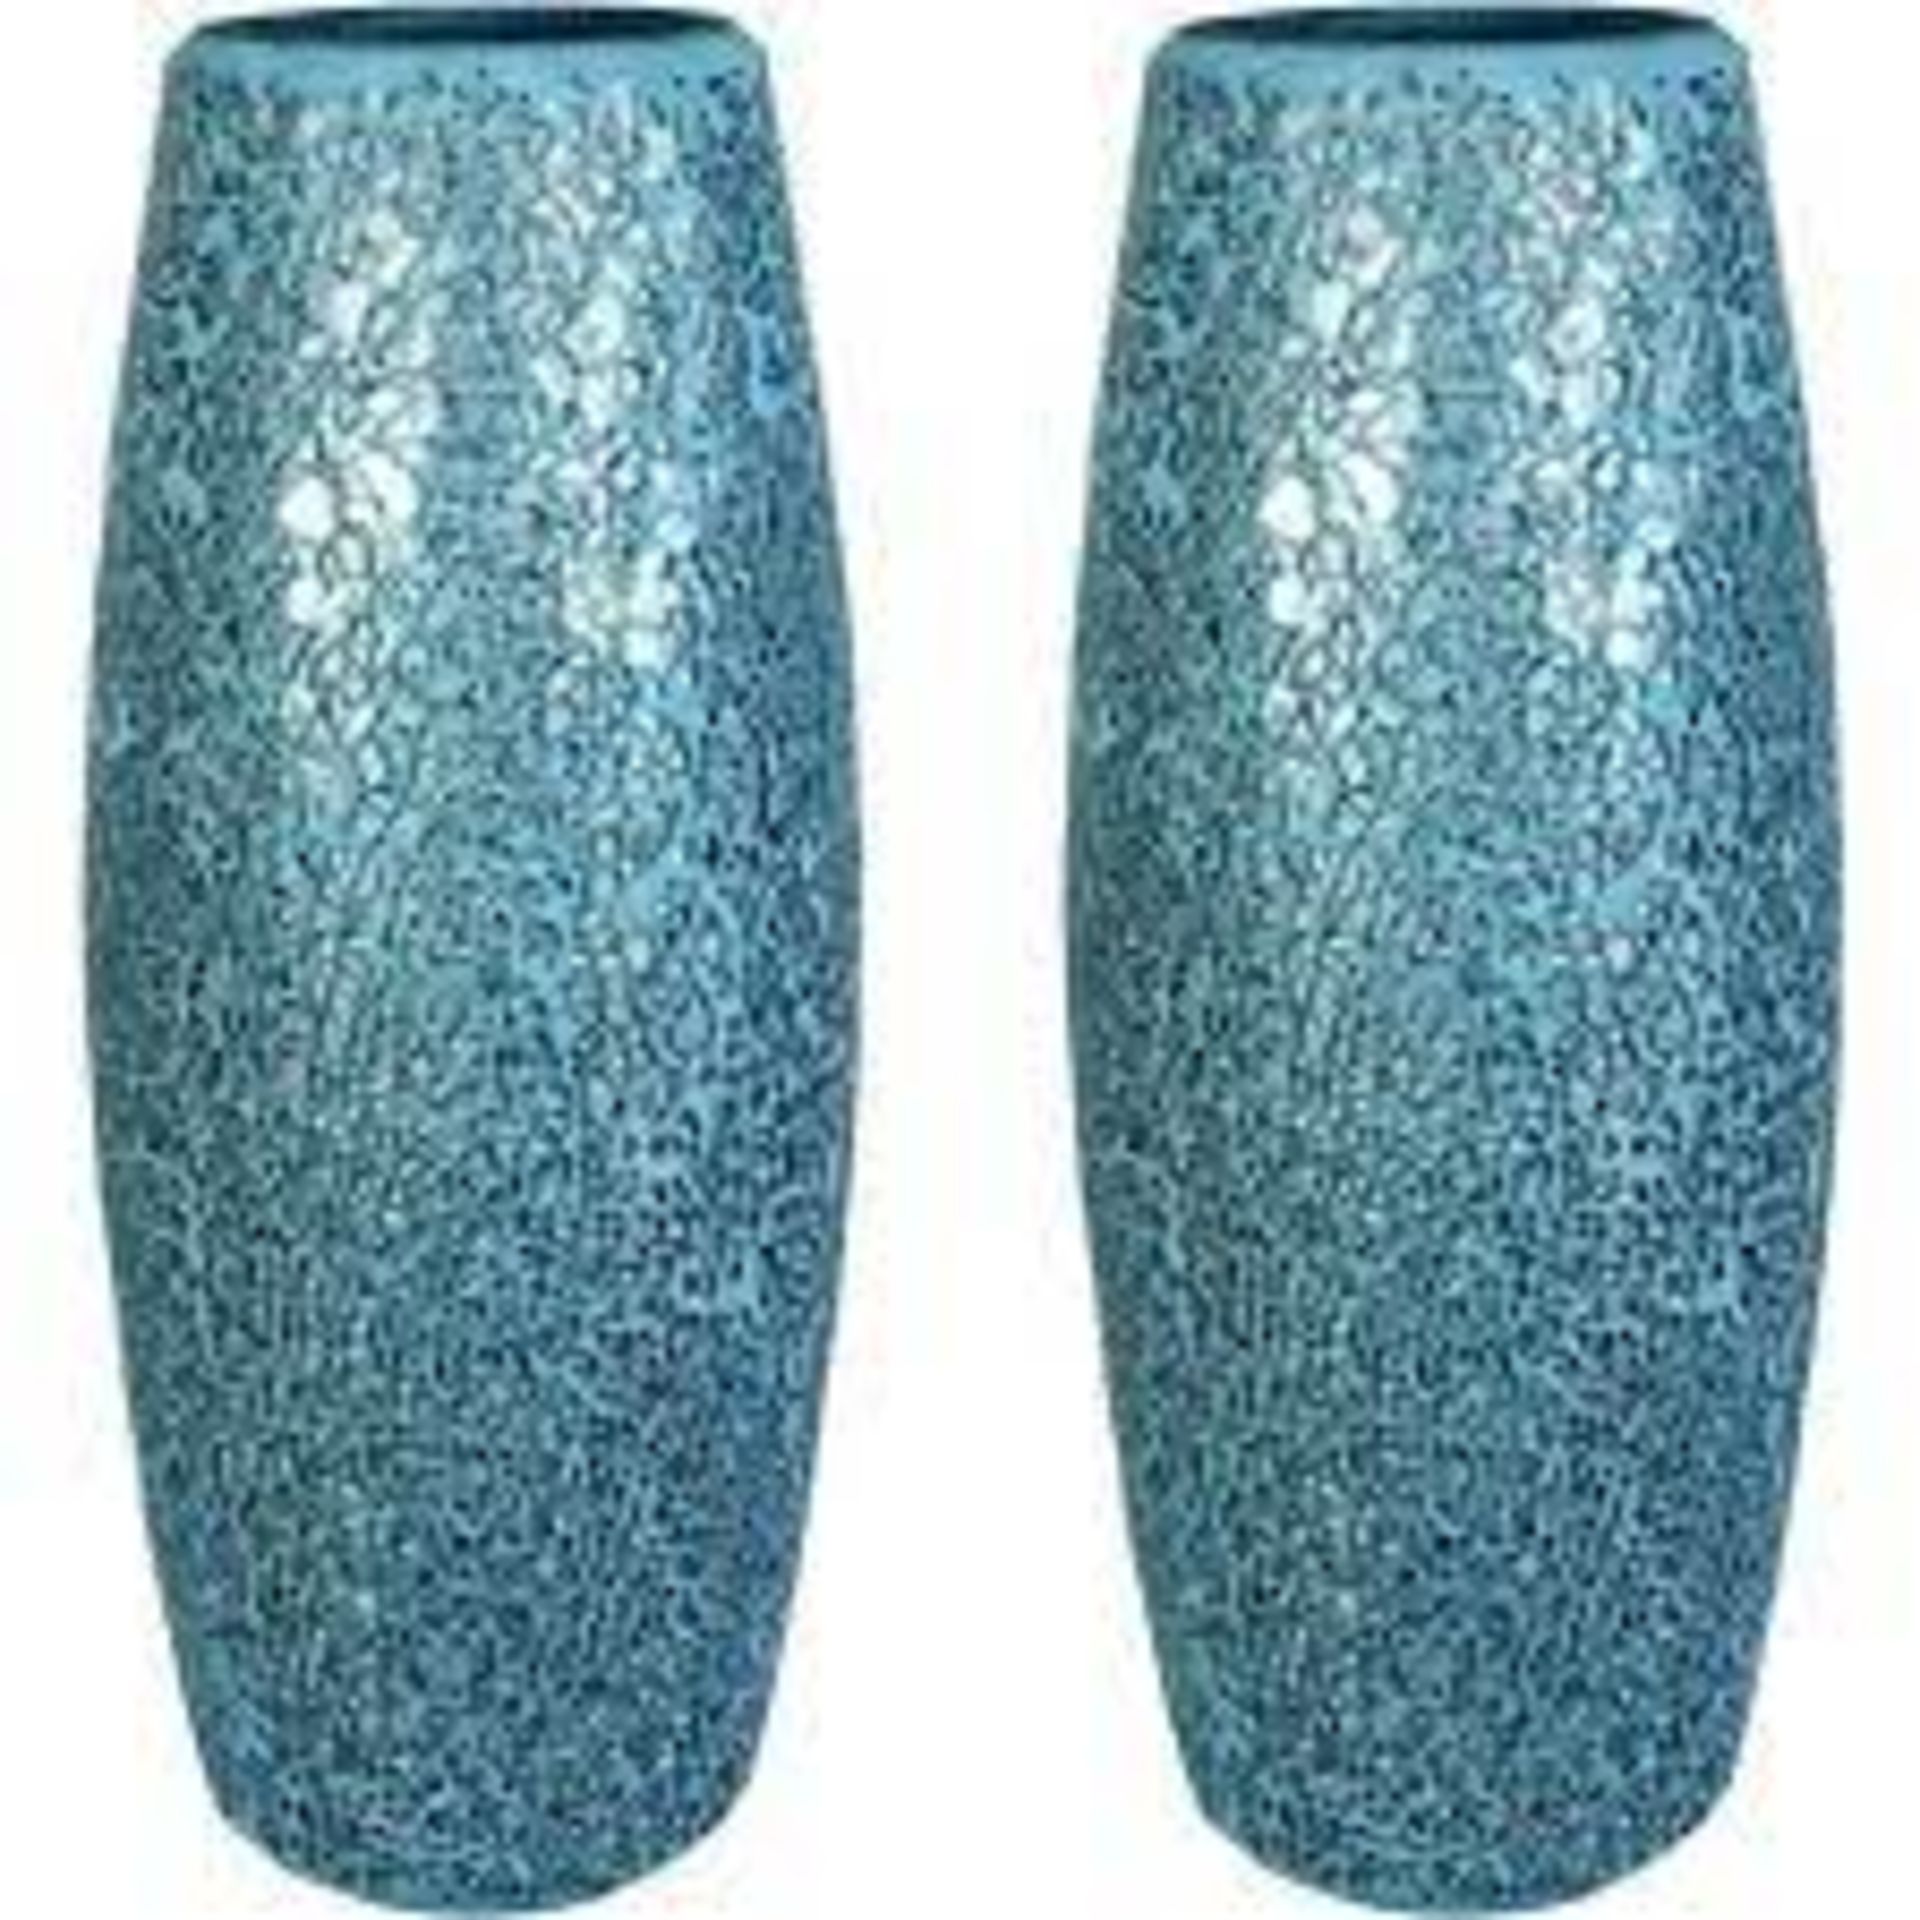 Lucente 2PC Crackle Glass Mosaic Vase with Blue & Silver Finis. - ER46